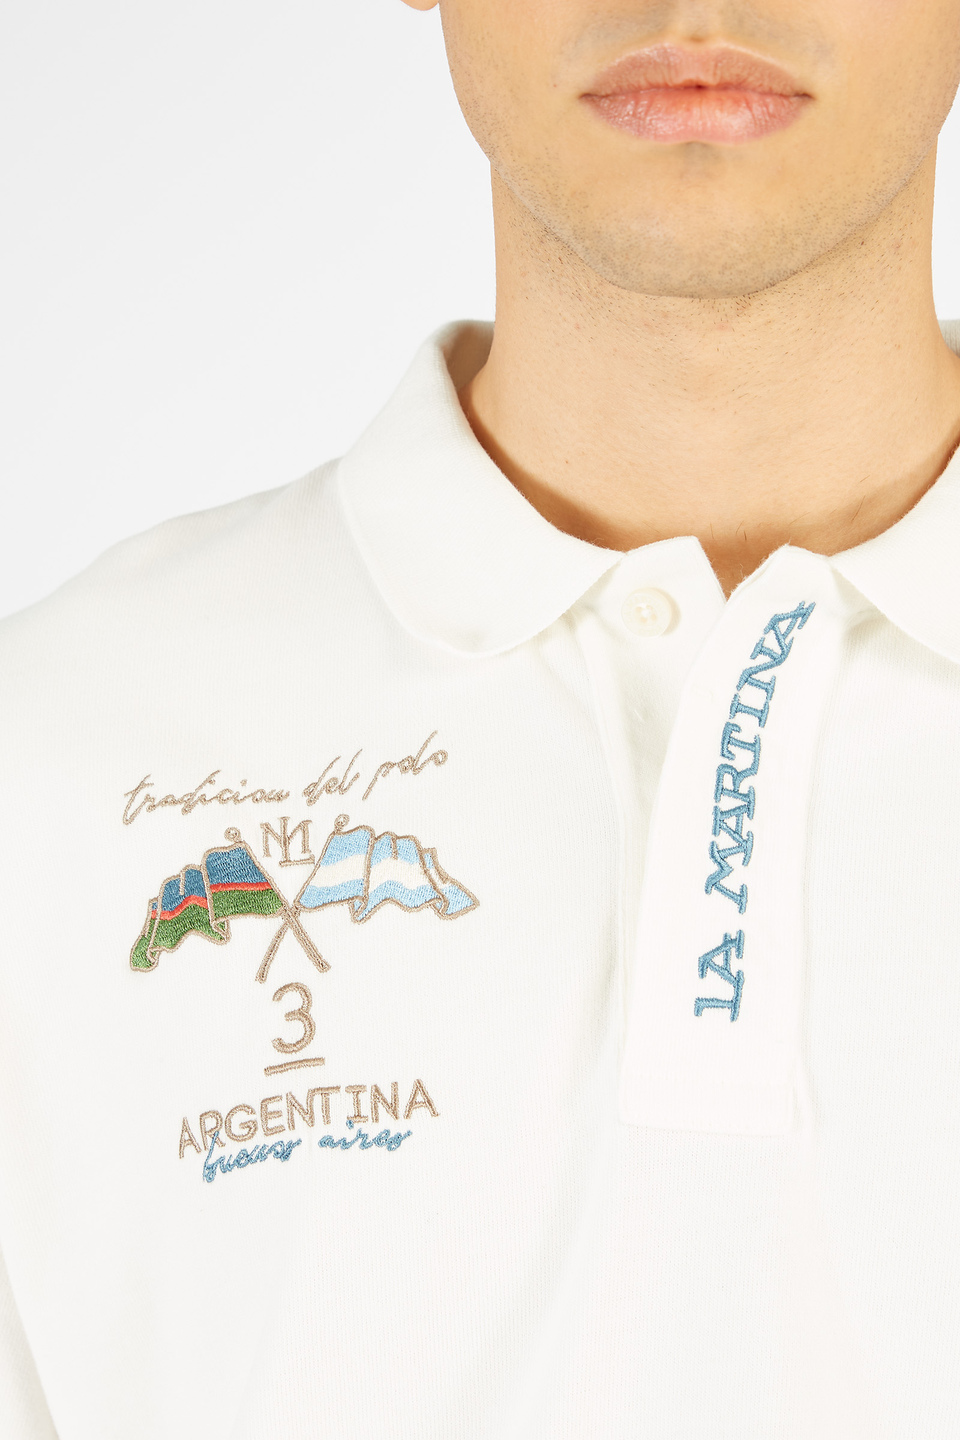 Men’s polo shirt Inmortales in cotton jersey comfort fit long sleeves | La Martina - Official Online Shop